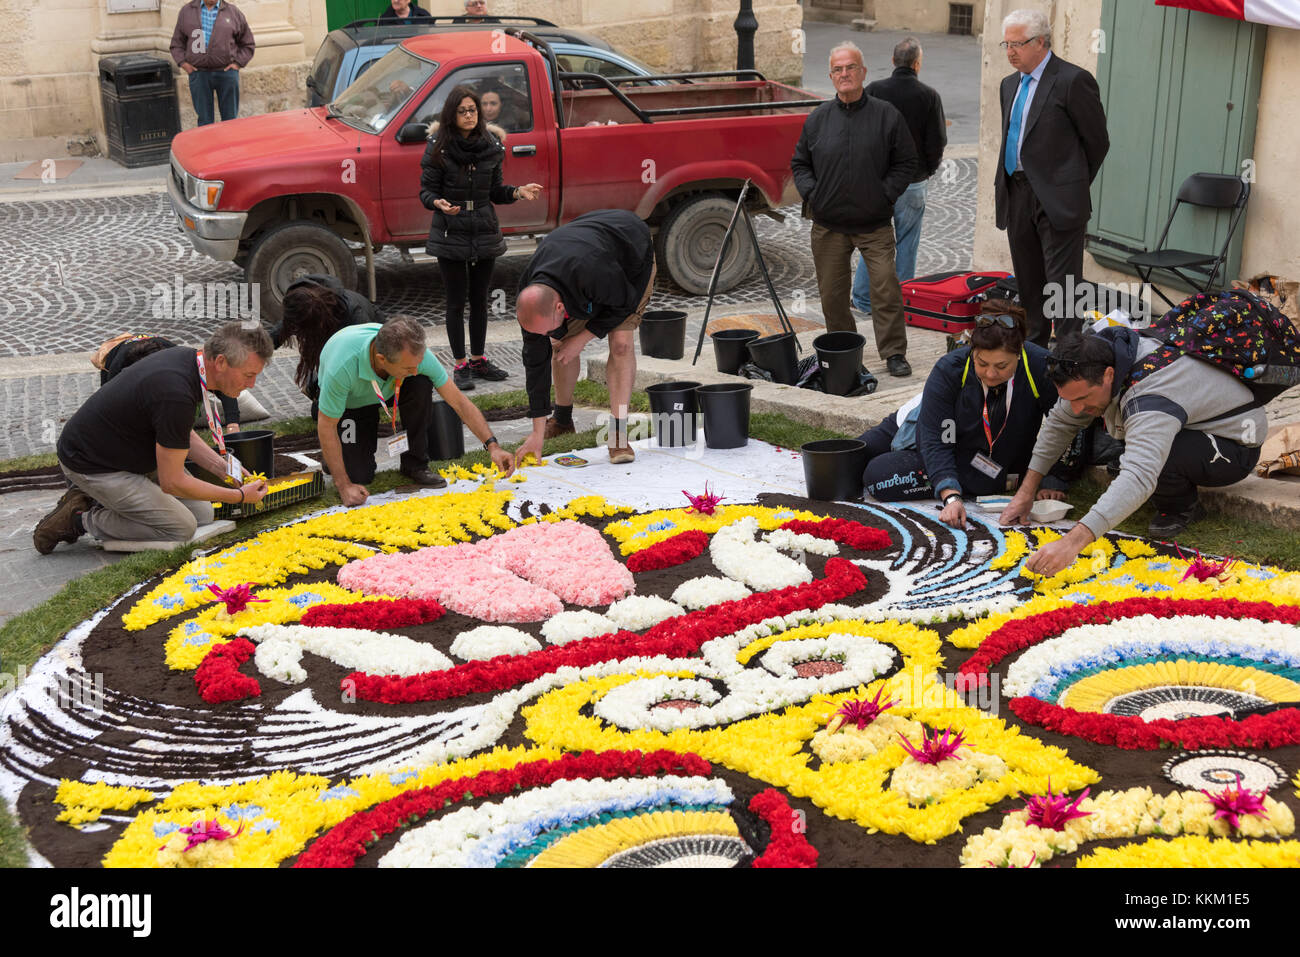 People making artistict street decorations using flower petals in a festival in Gozo Malta Stock Photo